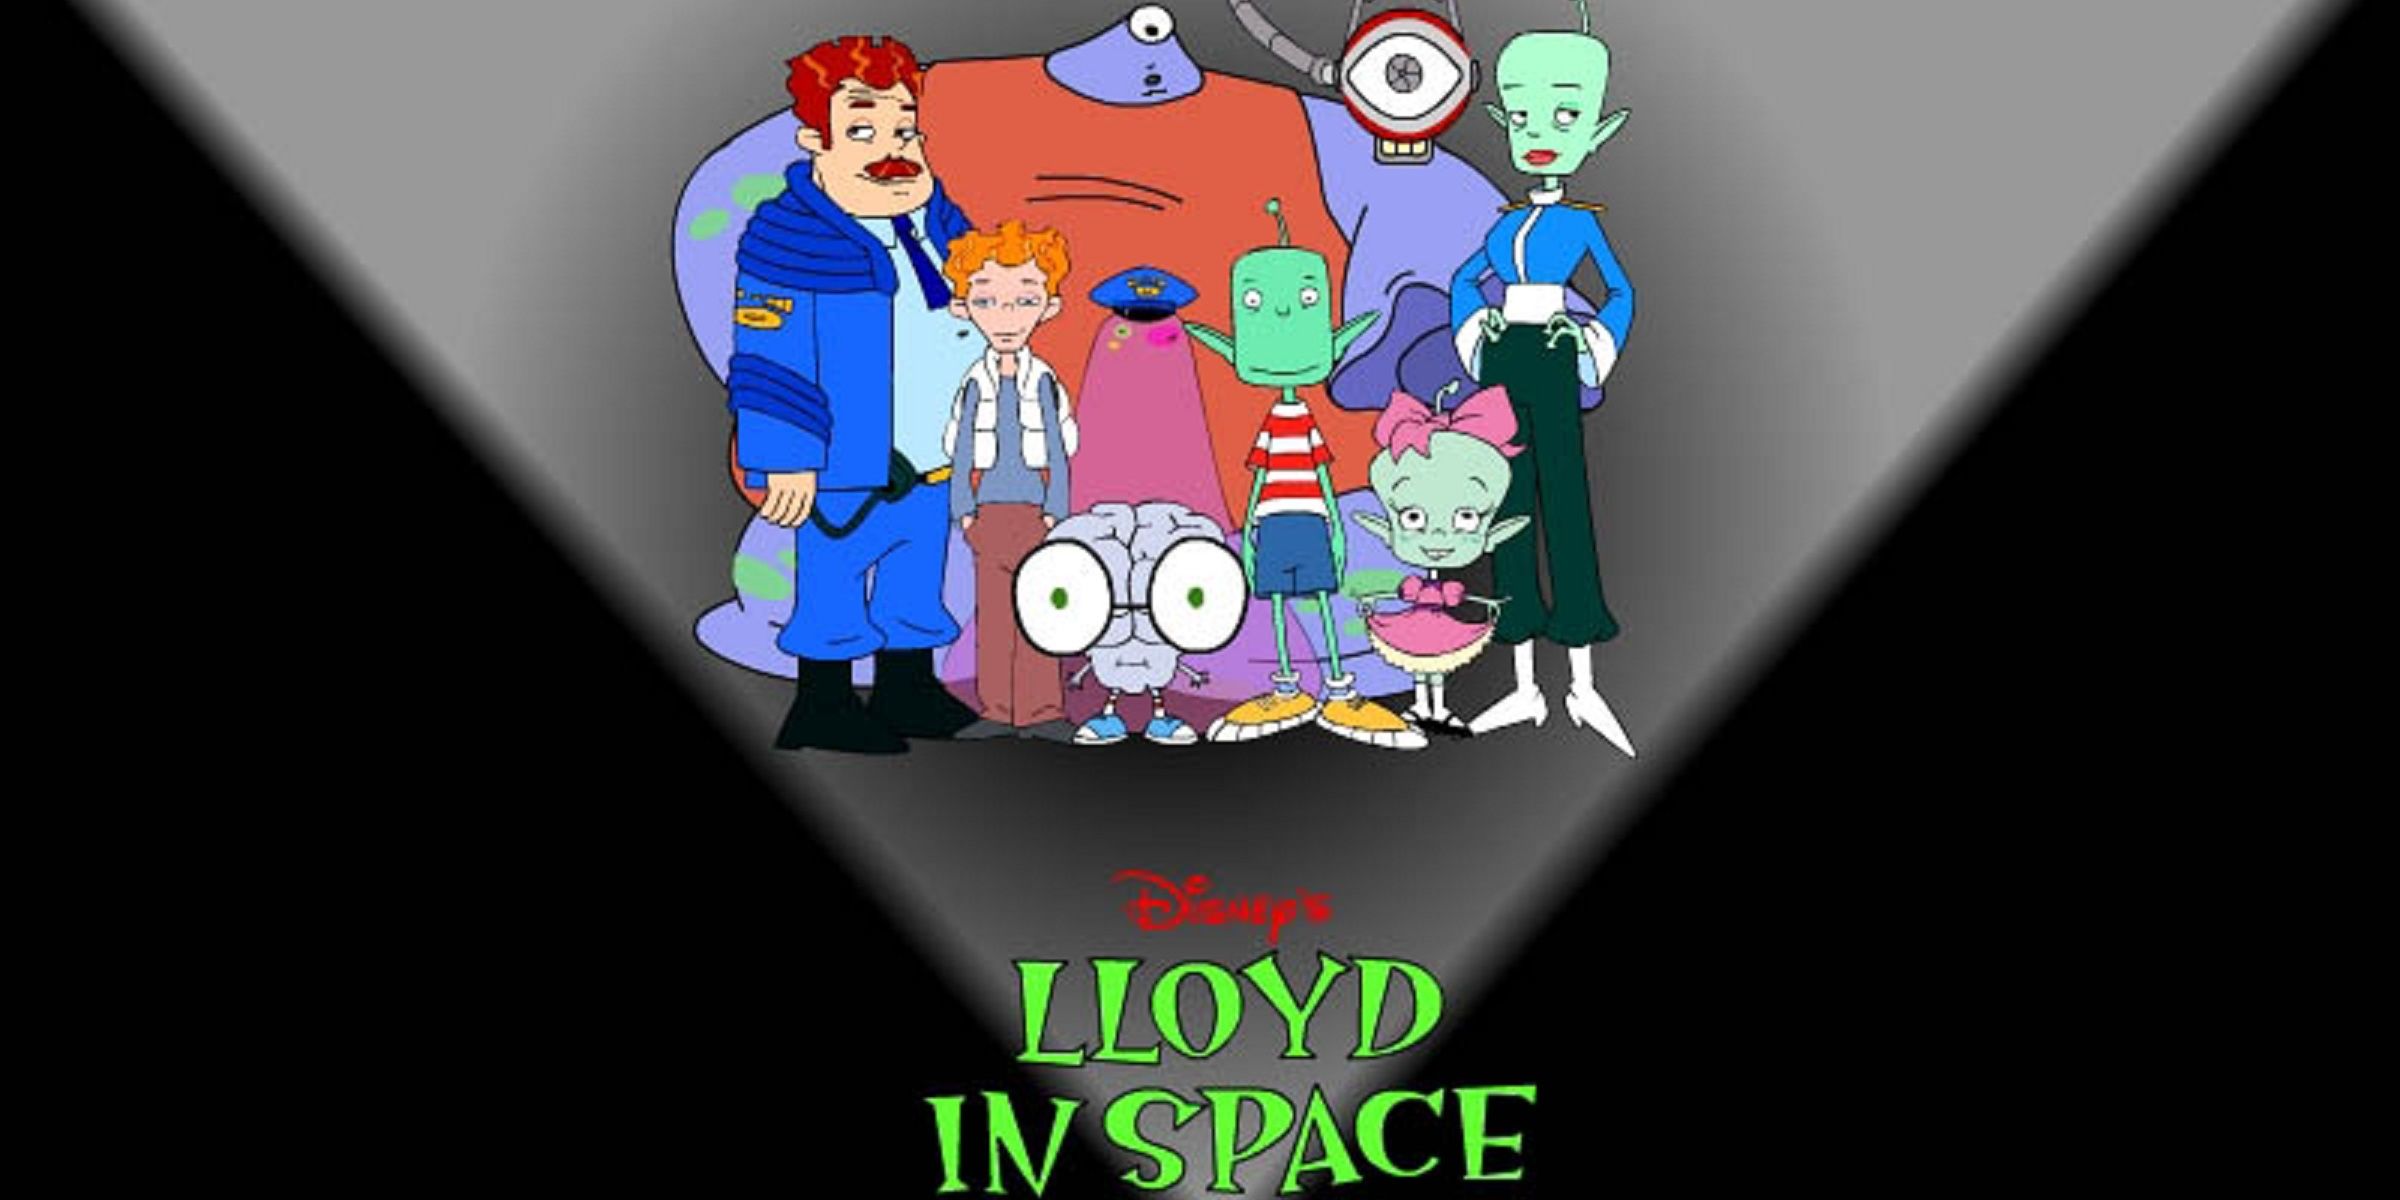 Lloyd In Space Episodes one of the best early 2000's cartoons based on space.